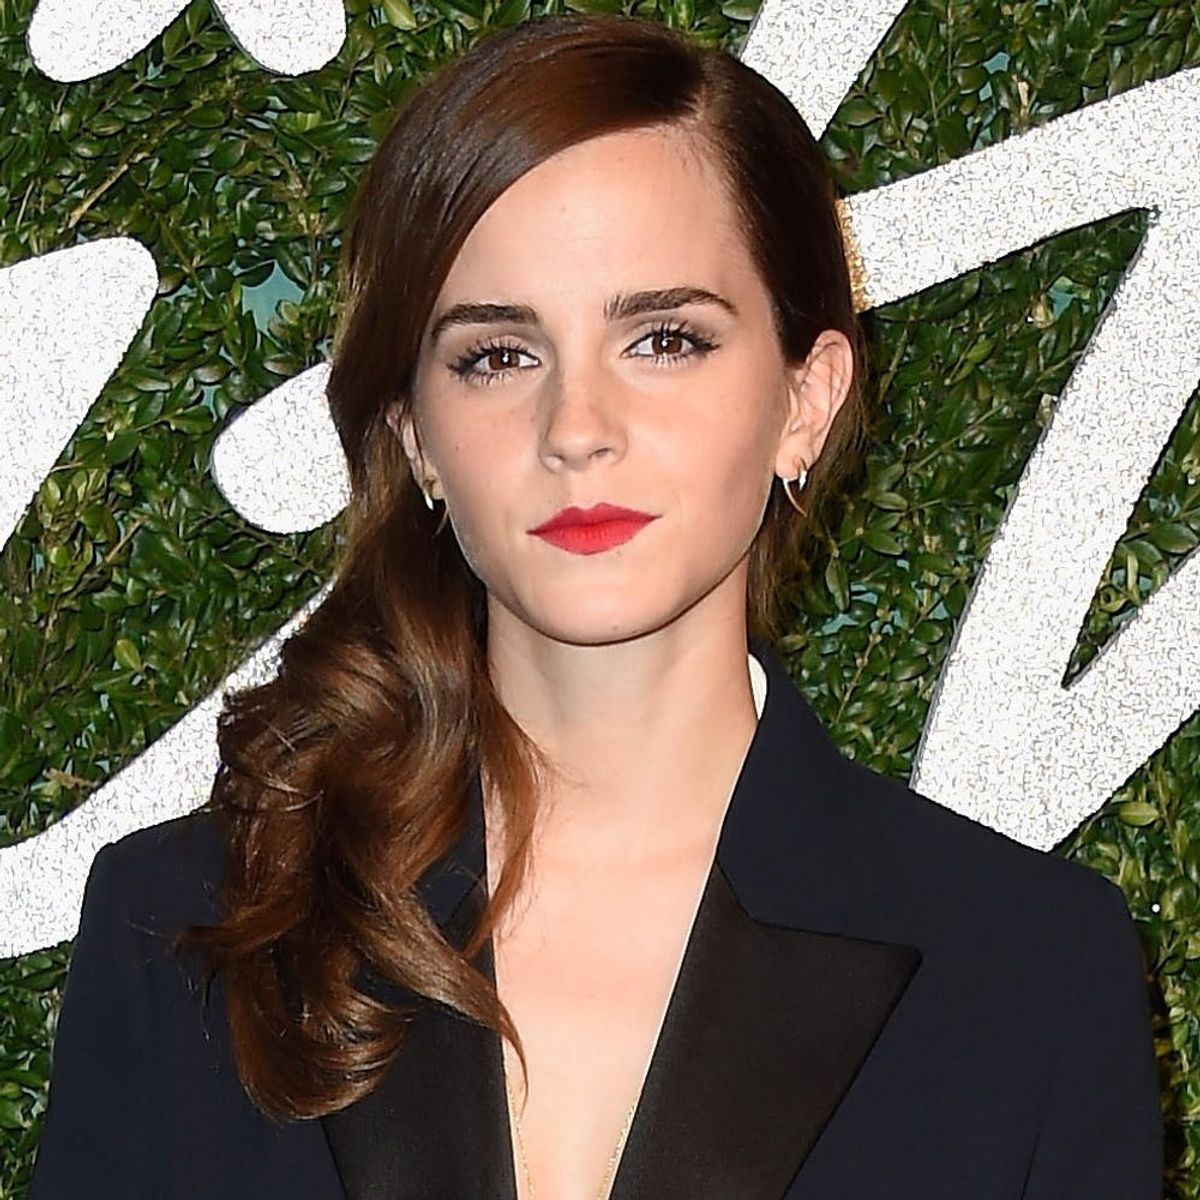 Emma Watson’s New Haircut Will Make You Want to Chop It All Off